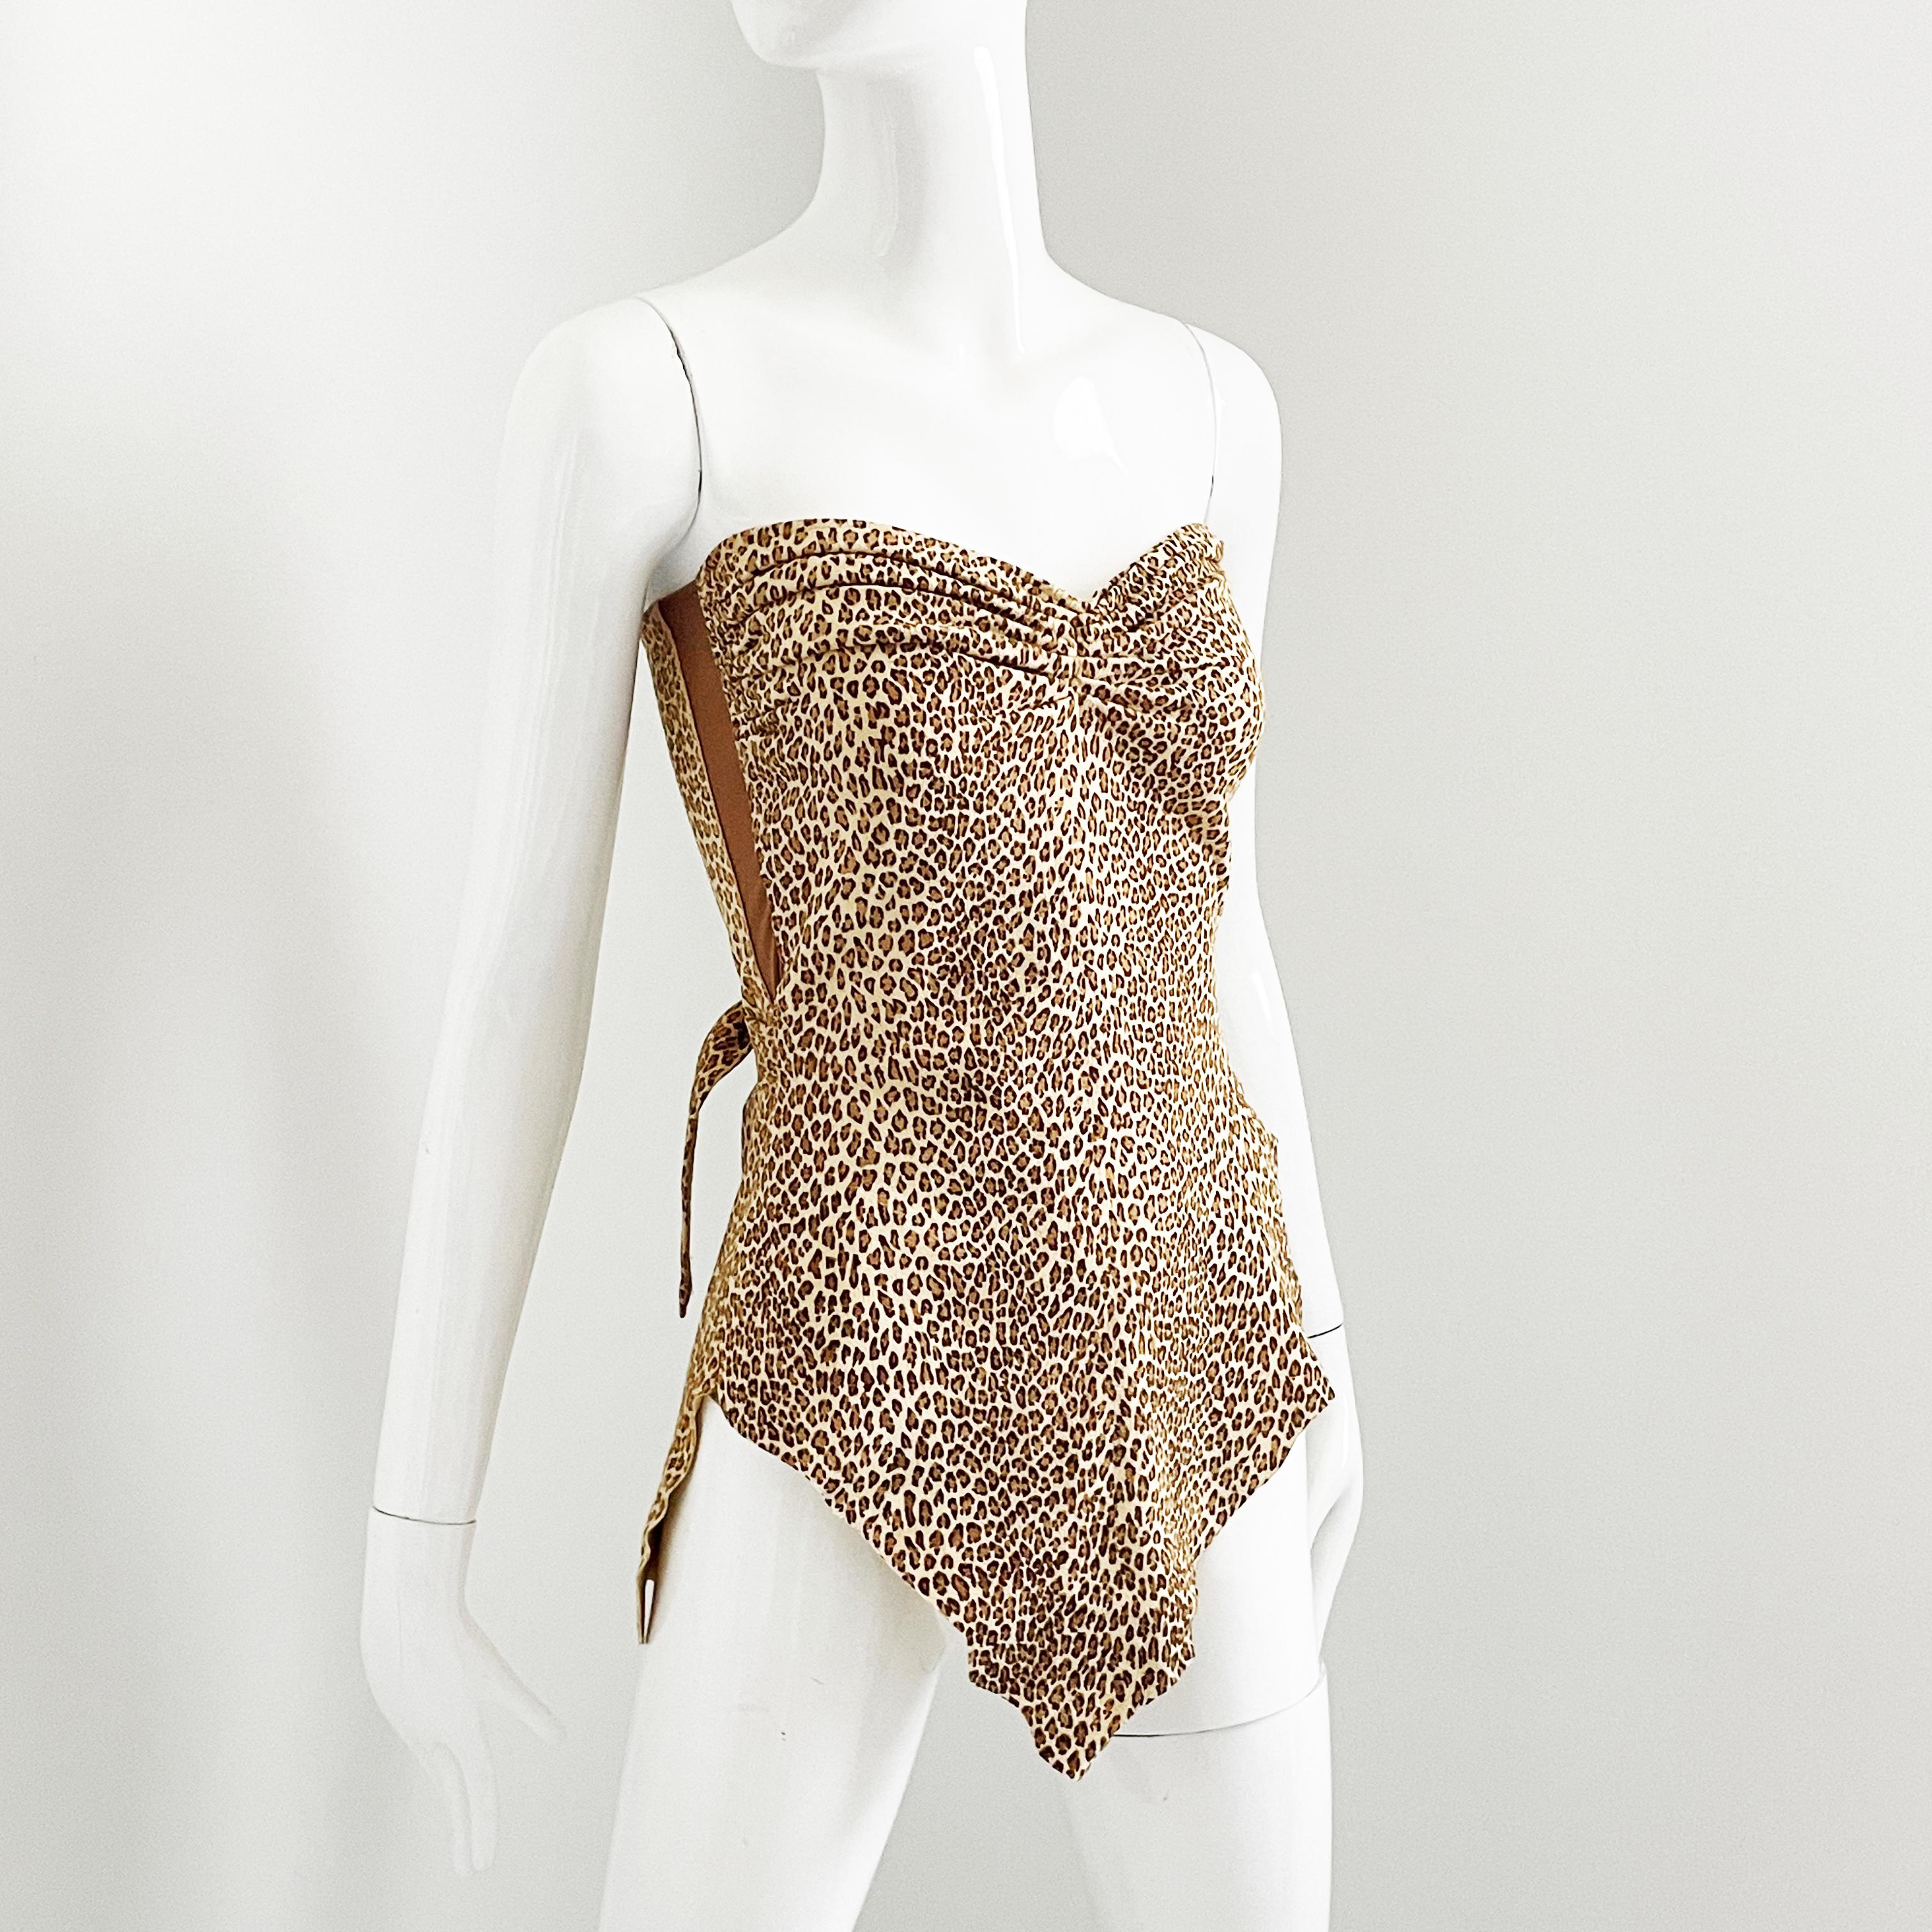 Norma Kamali OMO Leather Corset Top with Wrap Ties Leopard Print Vintage HTF For Sale 4